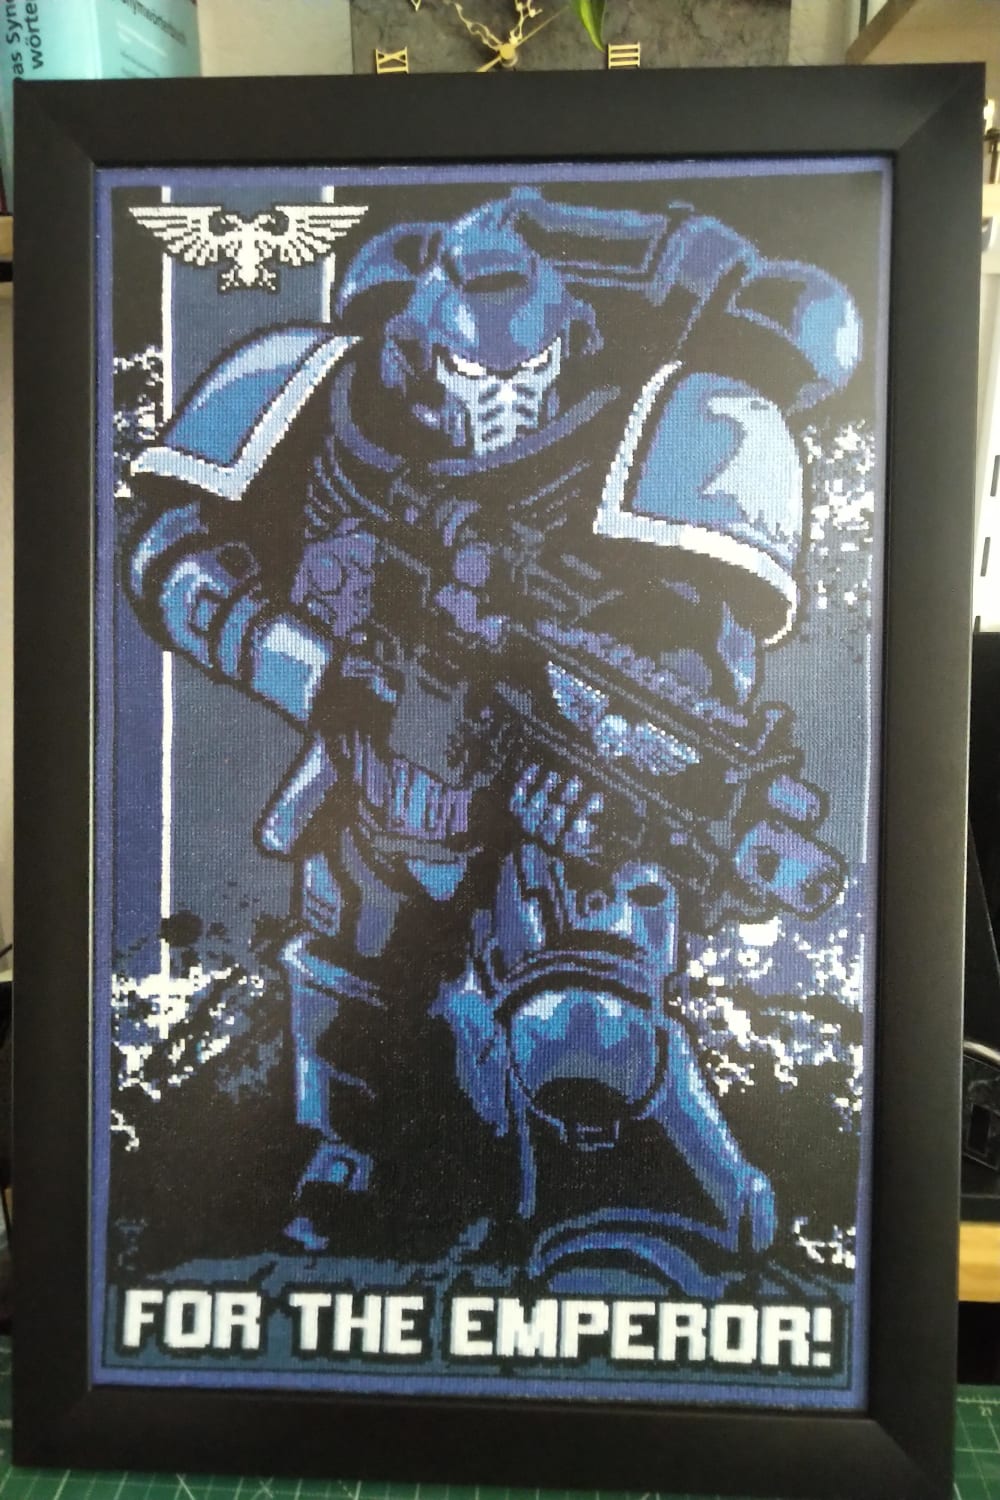 [FO] Behold my Space Marine and my terrible photograpgy skills. My biggest projekt yet, but didn't take nearly as long as I thought (some 4 month, unemployment yay!)